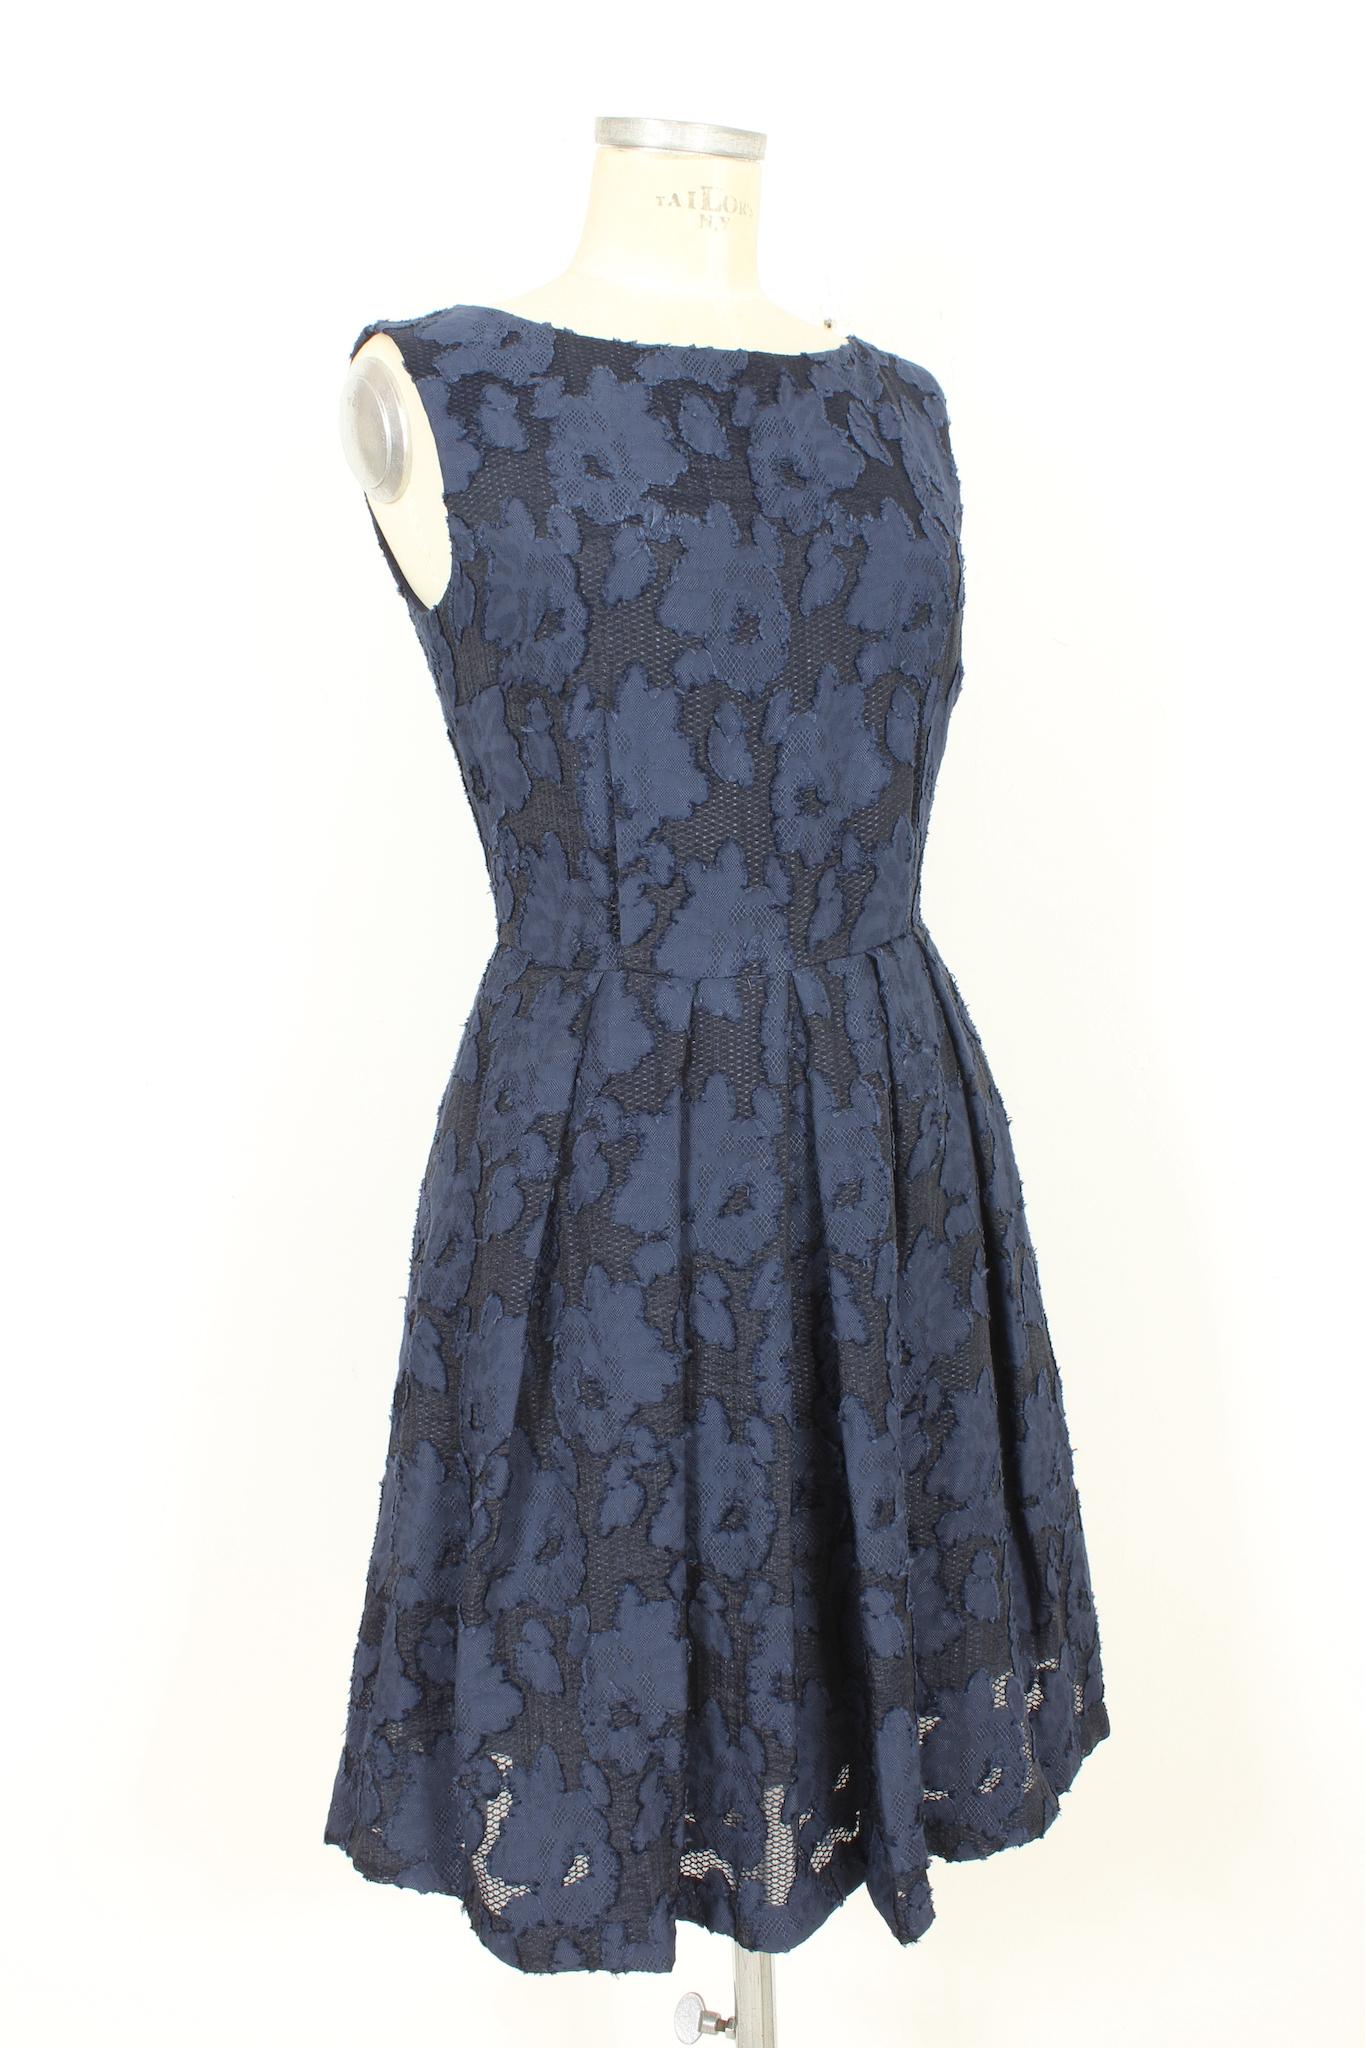 Blumarine Blue Lace Evening Sheath Dress 2000s In New Condition For Sale In Brindisi, Bt